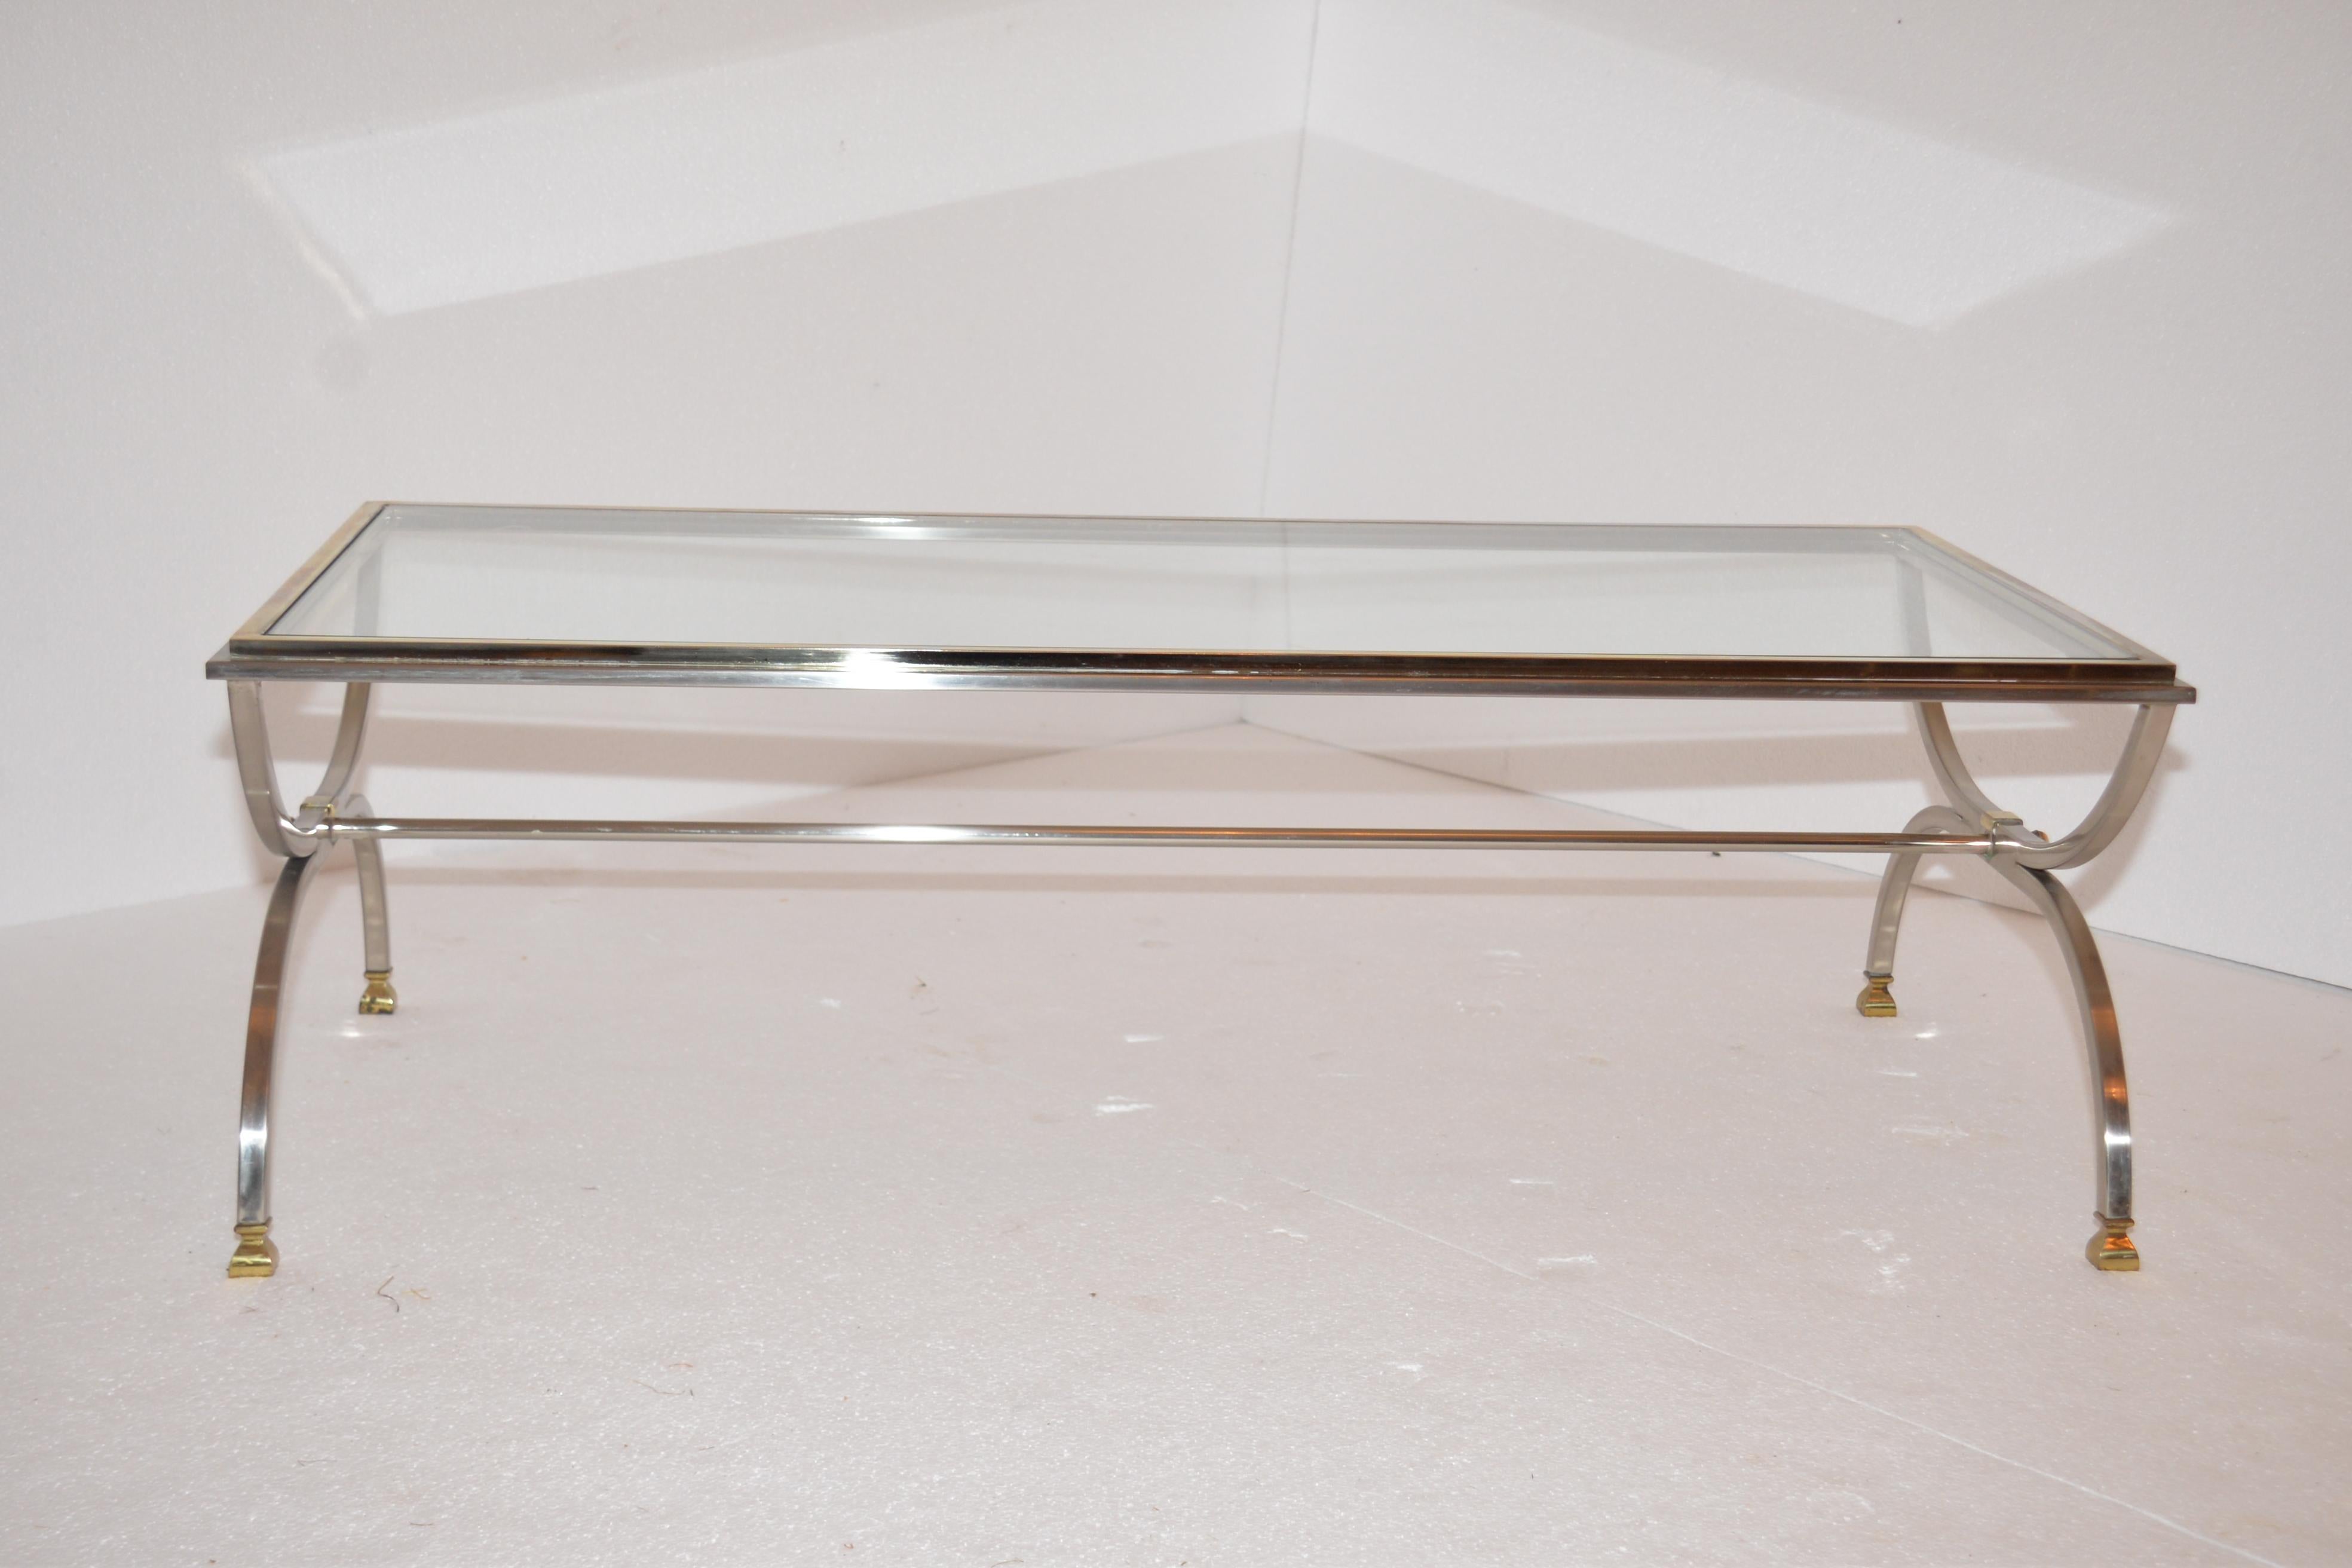 A Maison Jansen chrome and brass coffee table. A fabulous genuine vintage item that would compliment any style of interior. This is a timeless Classic item from the famous French designer.